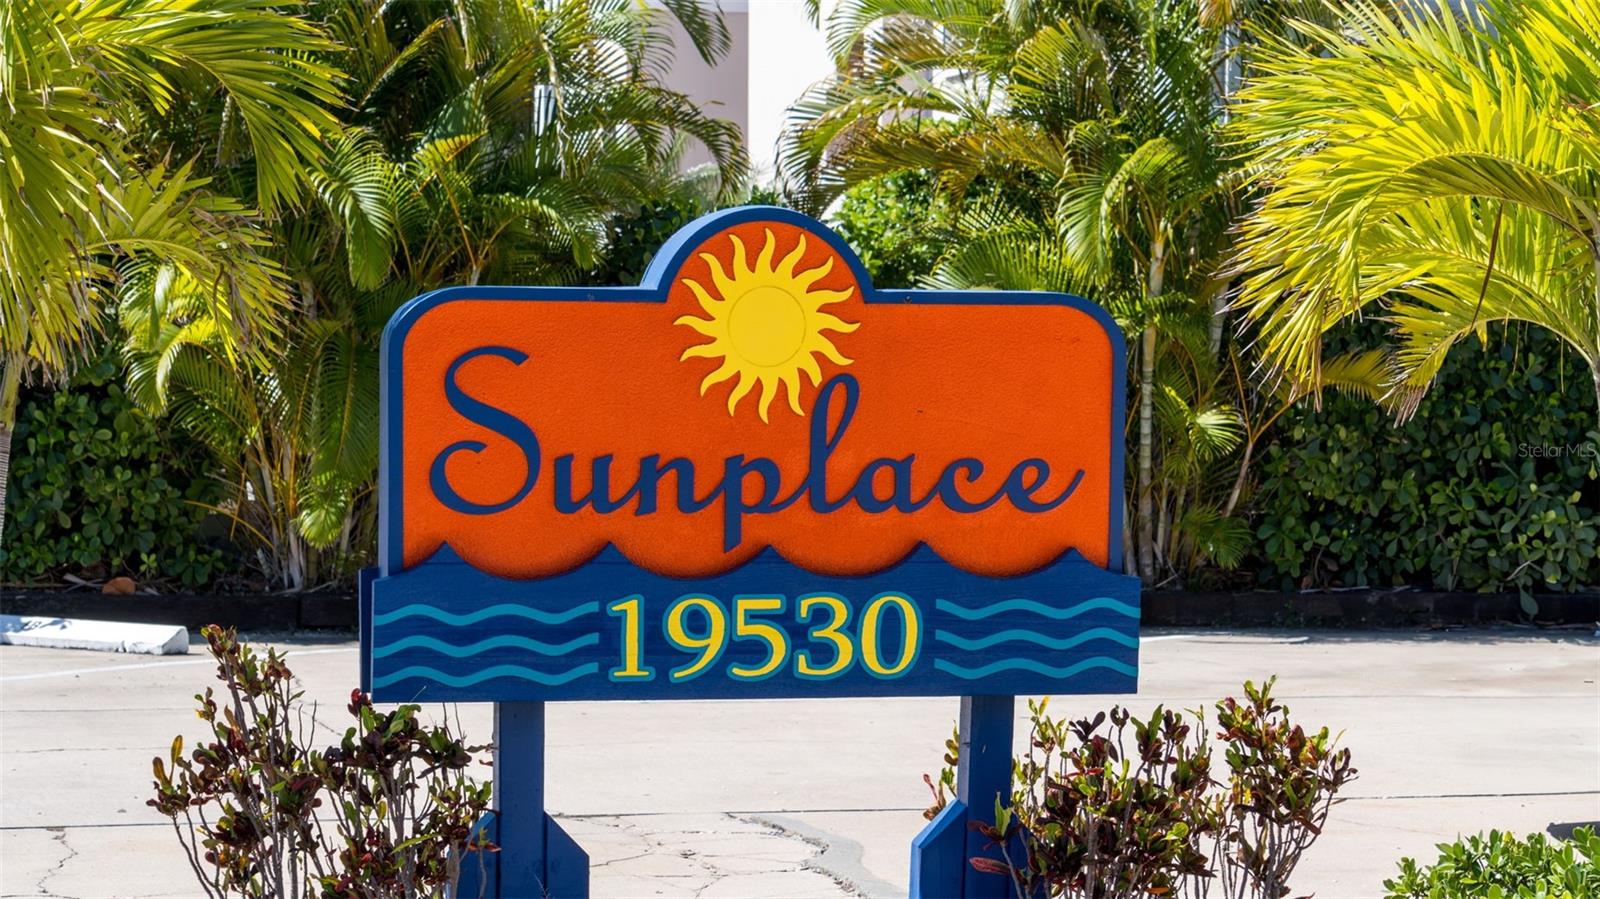 Rarely available condo at Sunplace in Indian Shores, FL. Nightly rentals allowed!